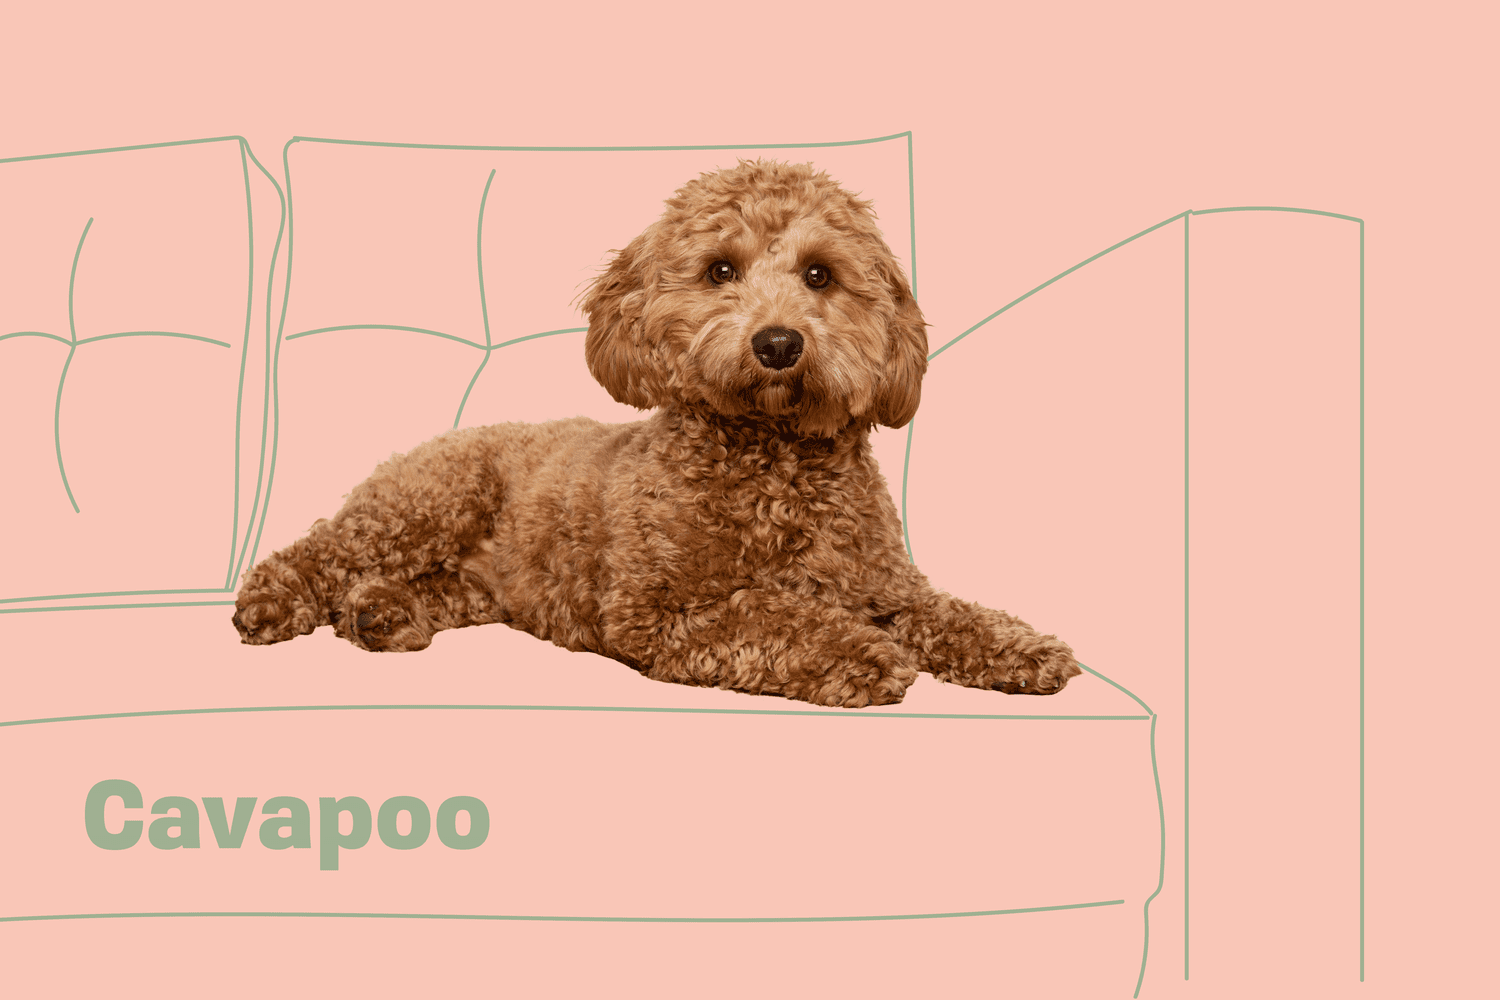 Cavapoo Dog Breed Information and Characteristics | Daily Paws